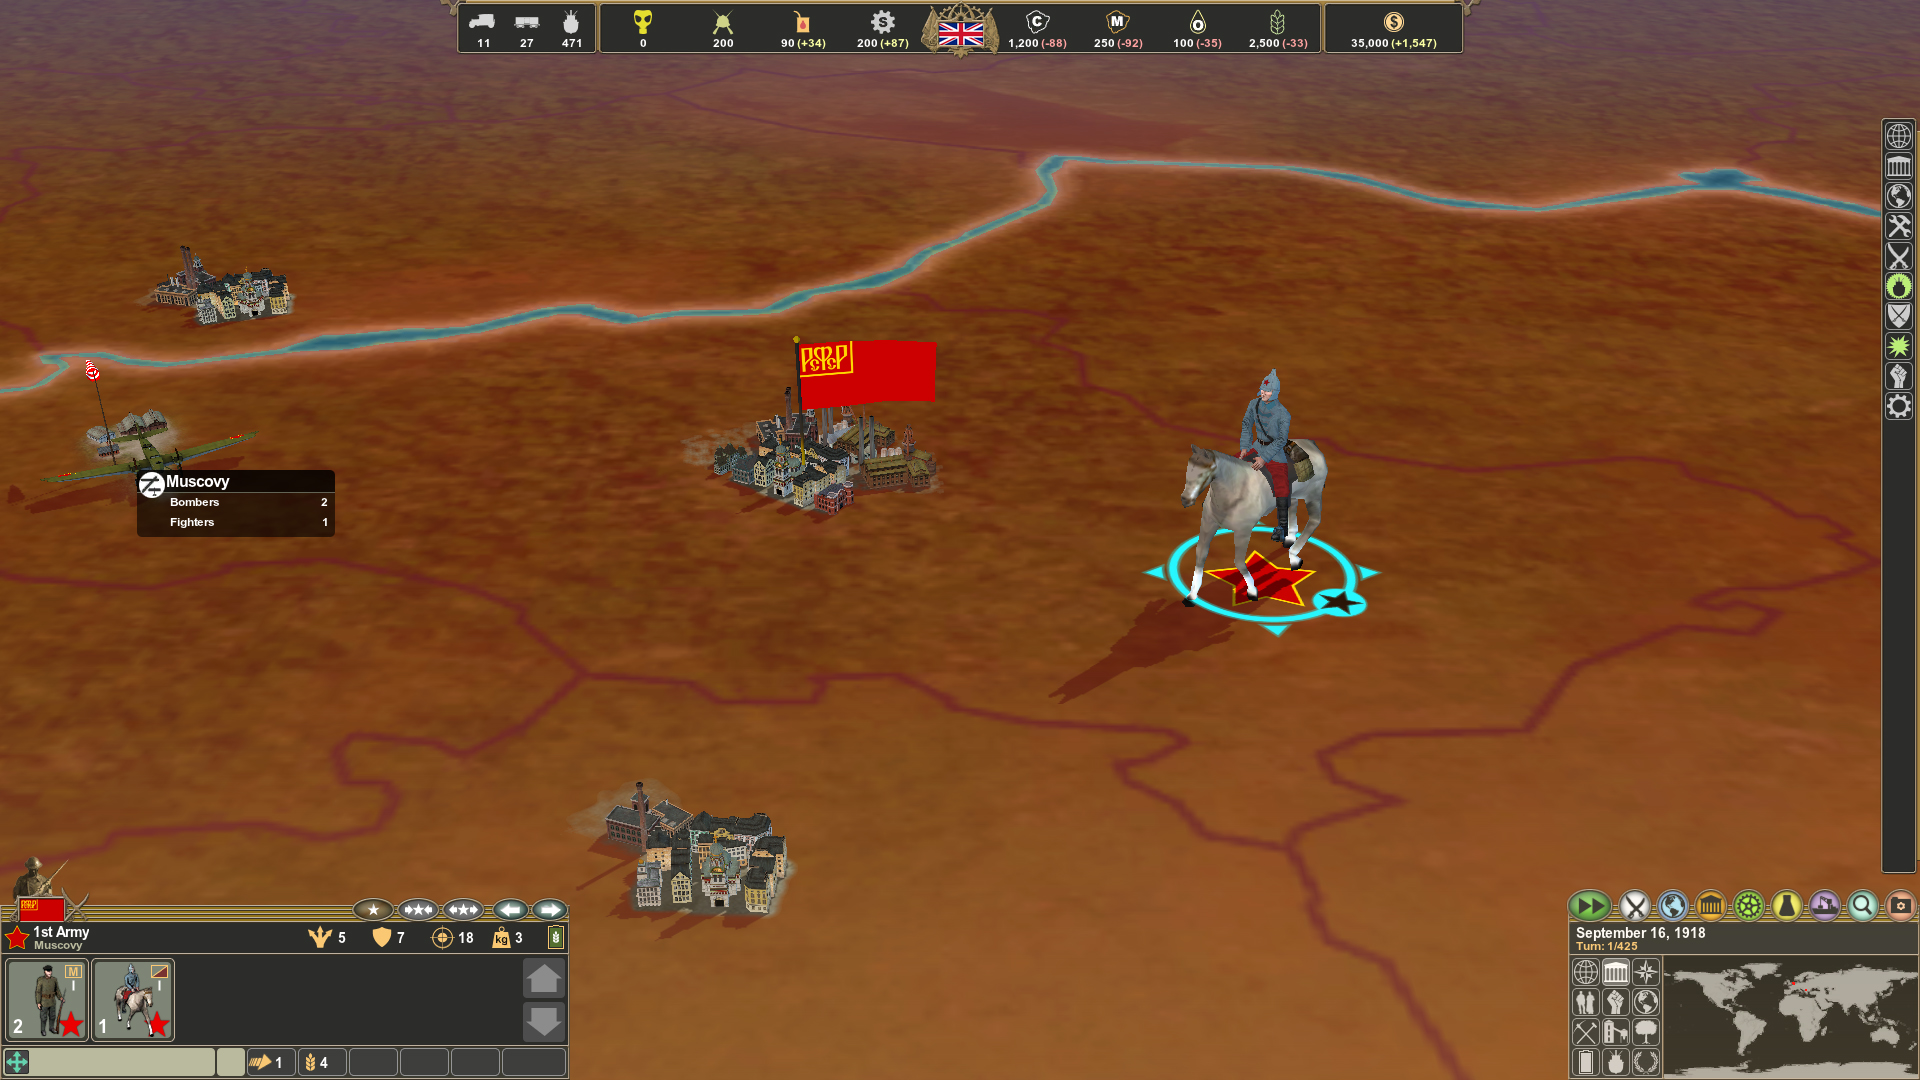 Making History: The Great War - The Red Army Featured Screenshot #1